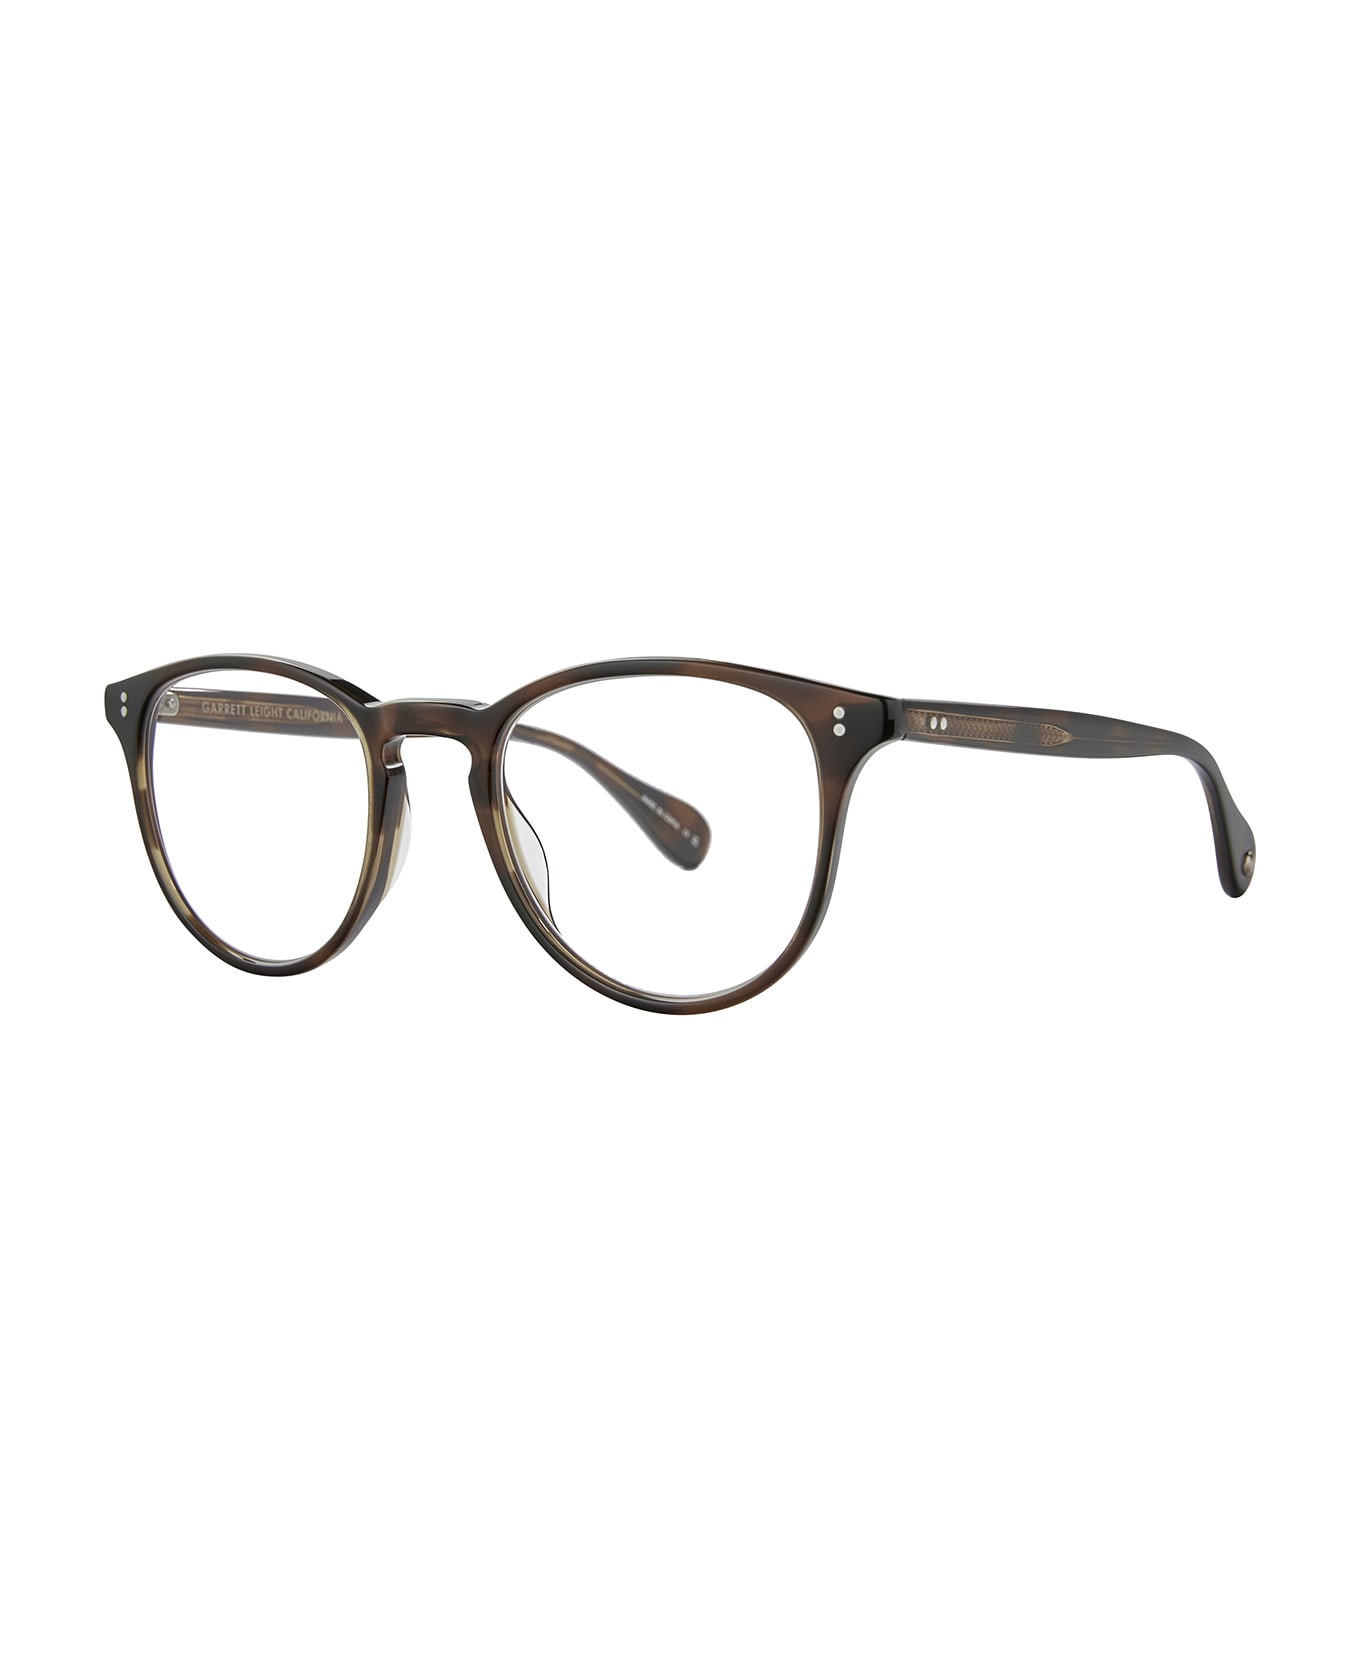 Garrett Leight Manzanita Spotted Brown Shell Glasses - Spotted Brown Shell アイウェア